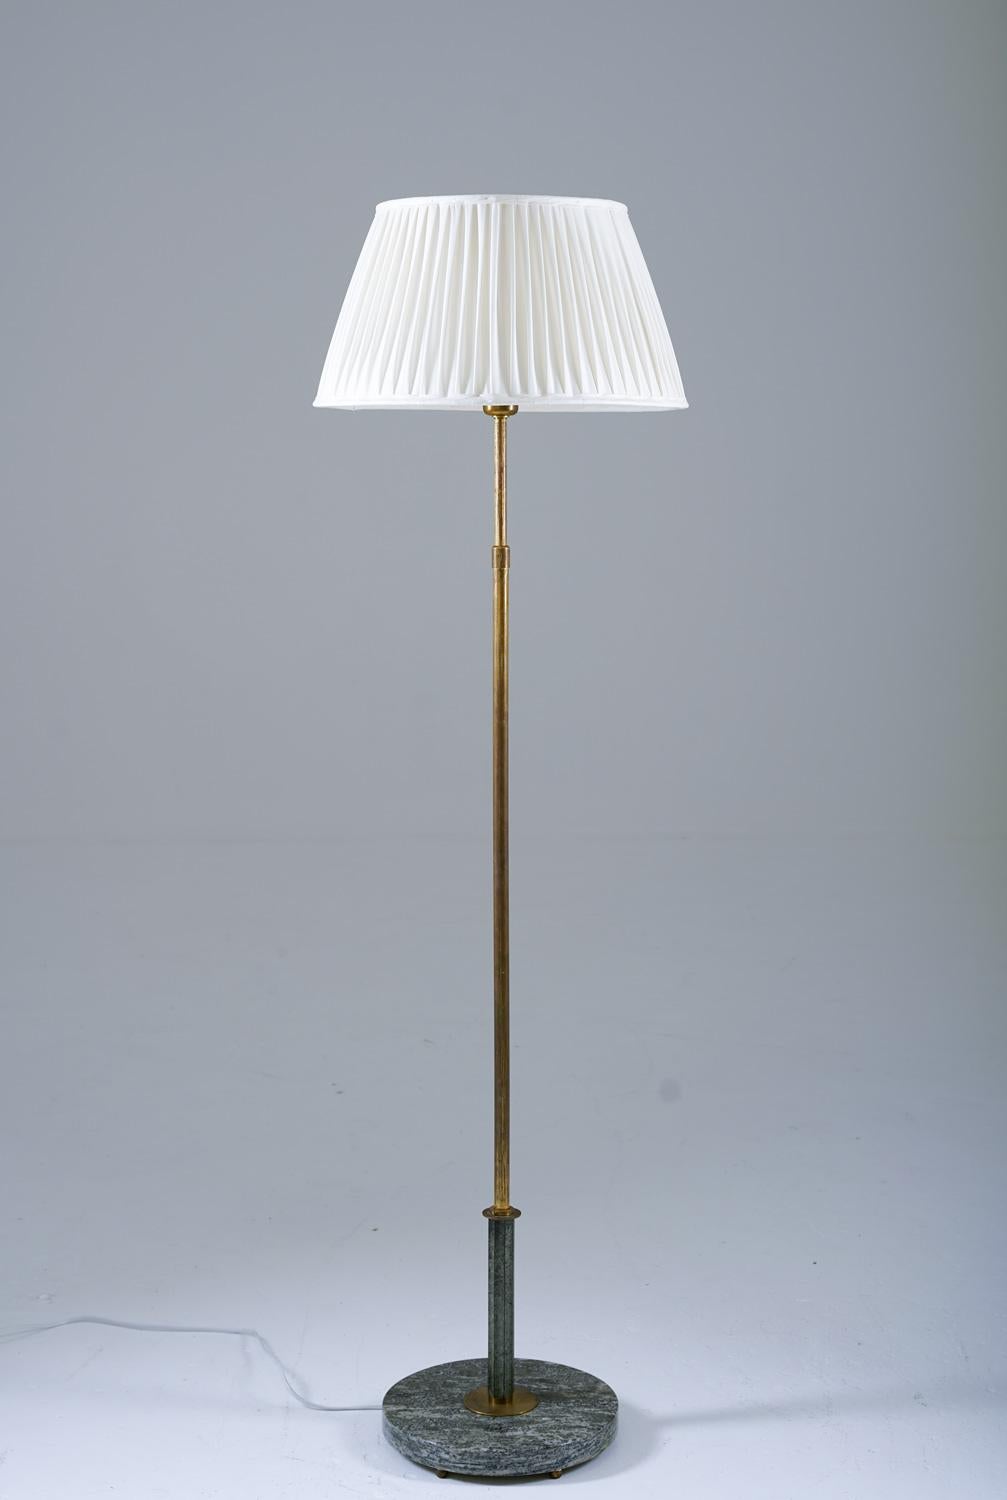 Scandinavian floor lamp manufactured in Sweden, 1930s.
Beautiful floor lamp made in beautiful materials. The foot is made of green marble, supporting the brass base, which has a marble-colored ornament. The height of the lamp is adjustable between